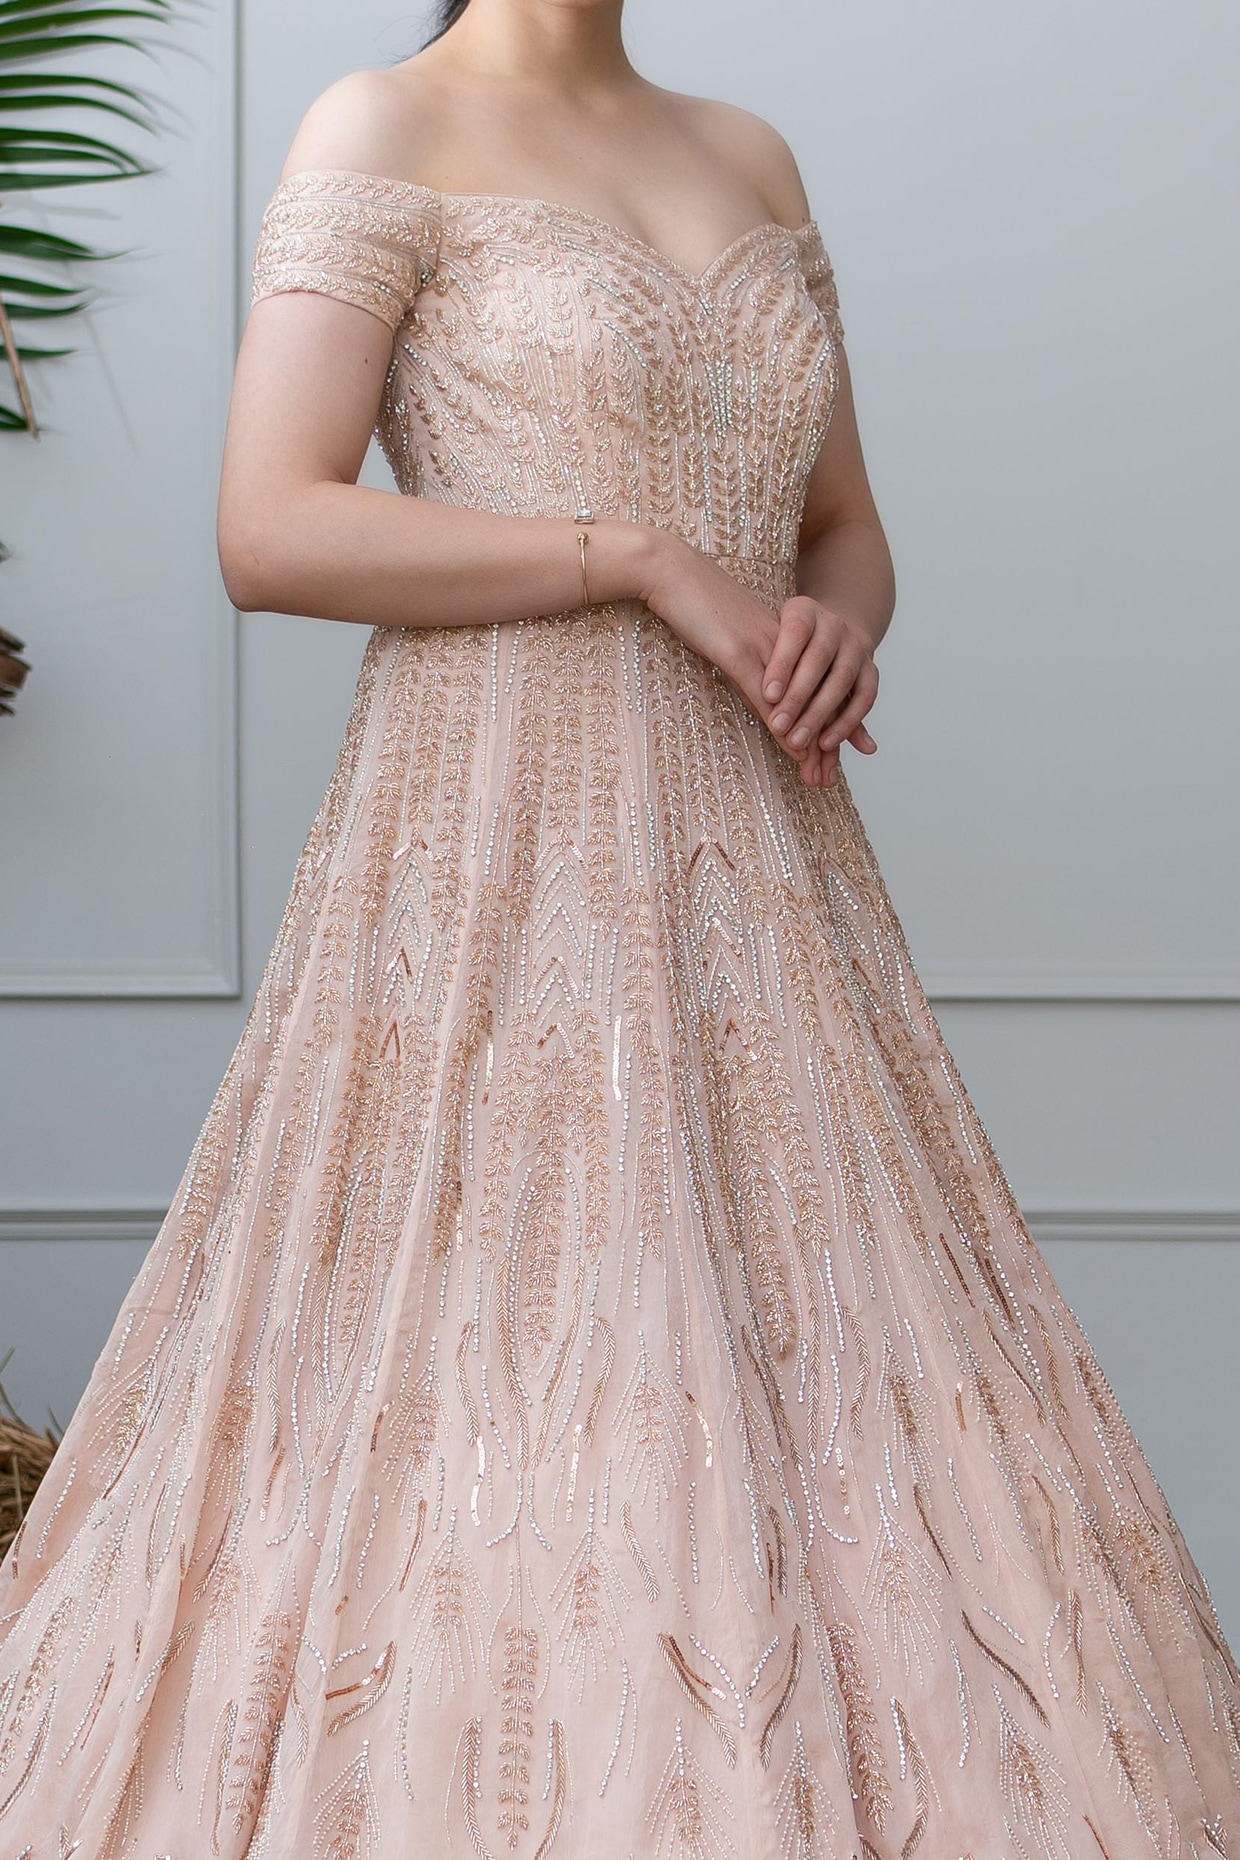 House Of Sitara Peach Off Shoulder Designer Gown with heavy embroidery  online - House Of Sitara - 3325379